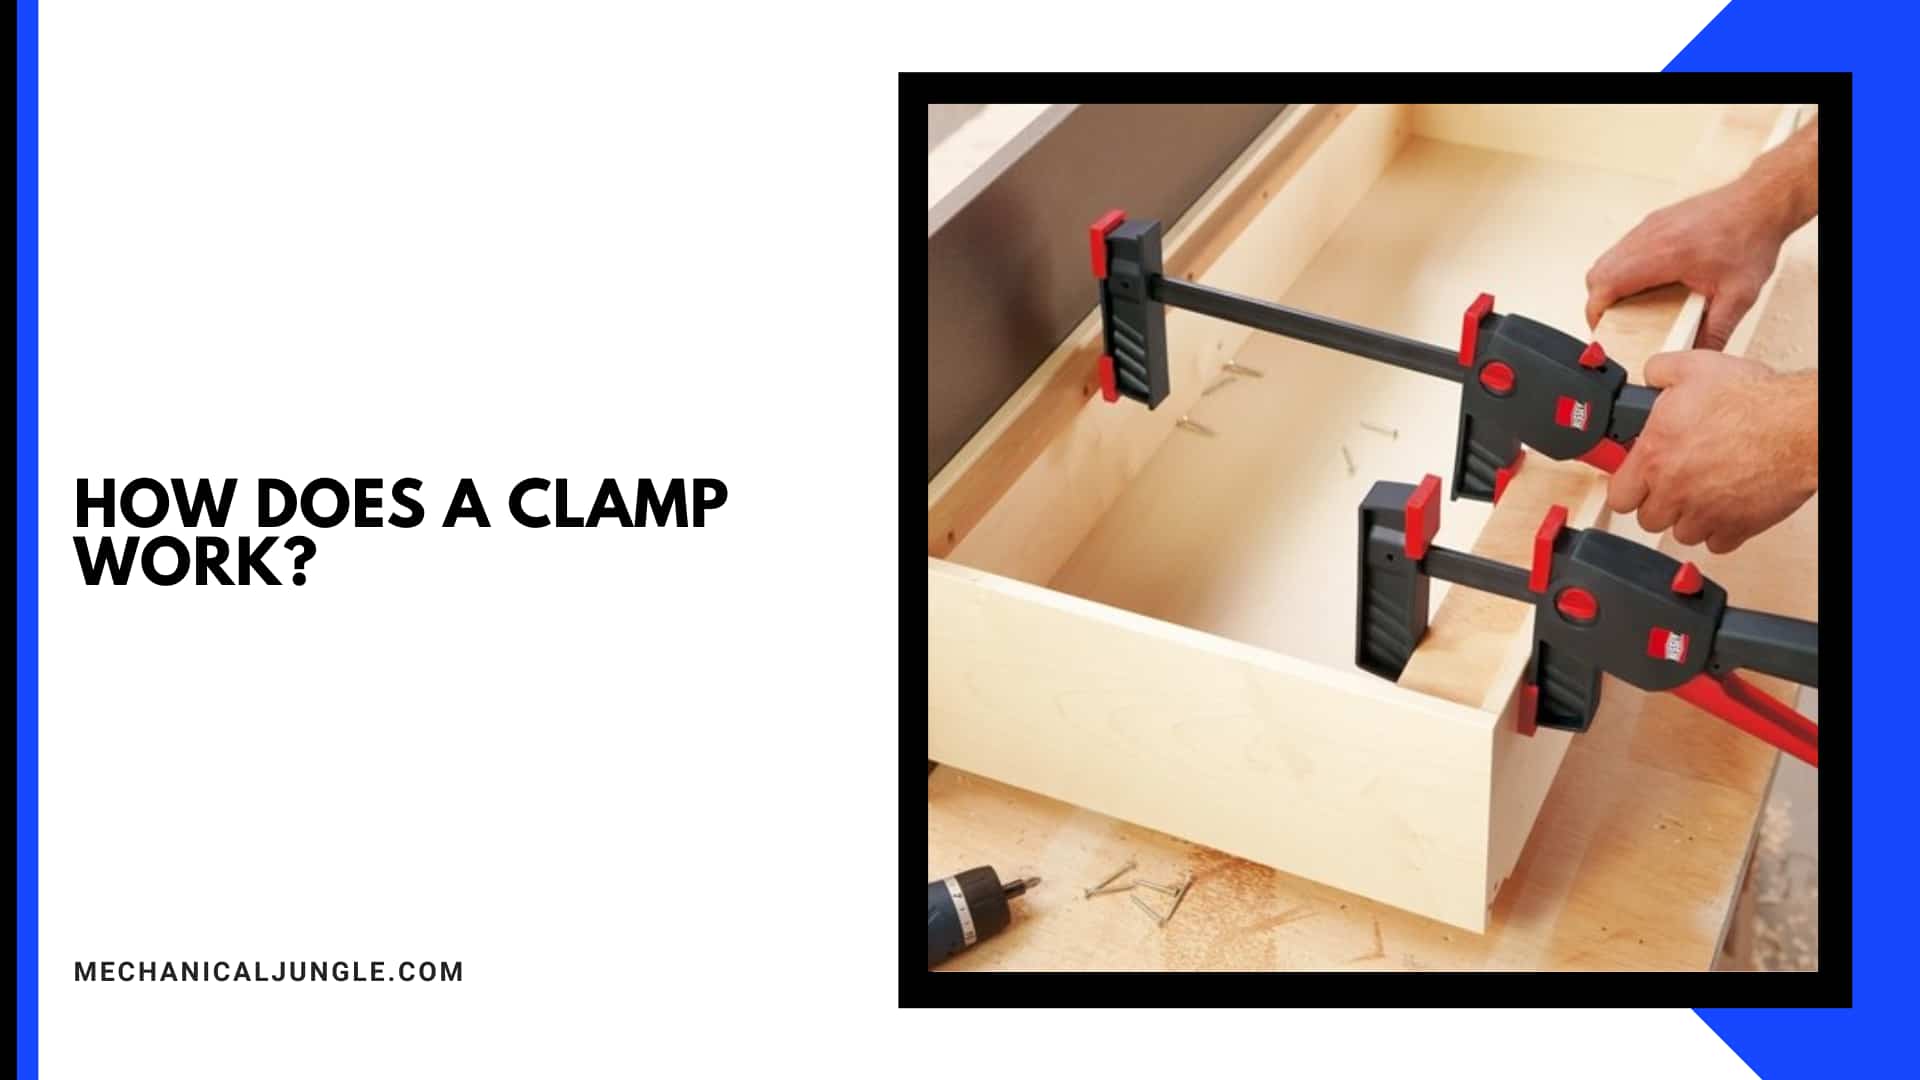 How Does a Clamp Work?